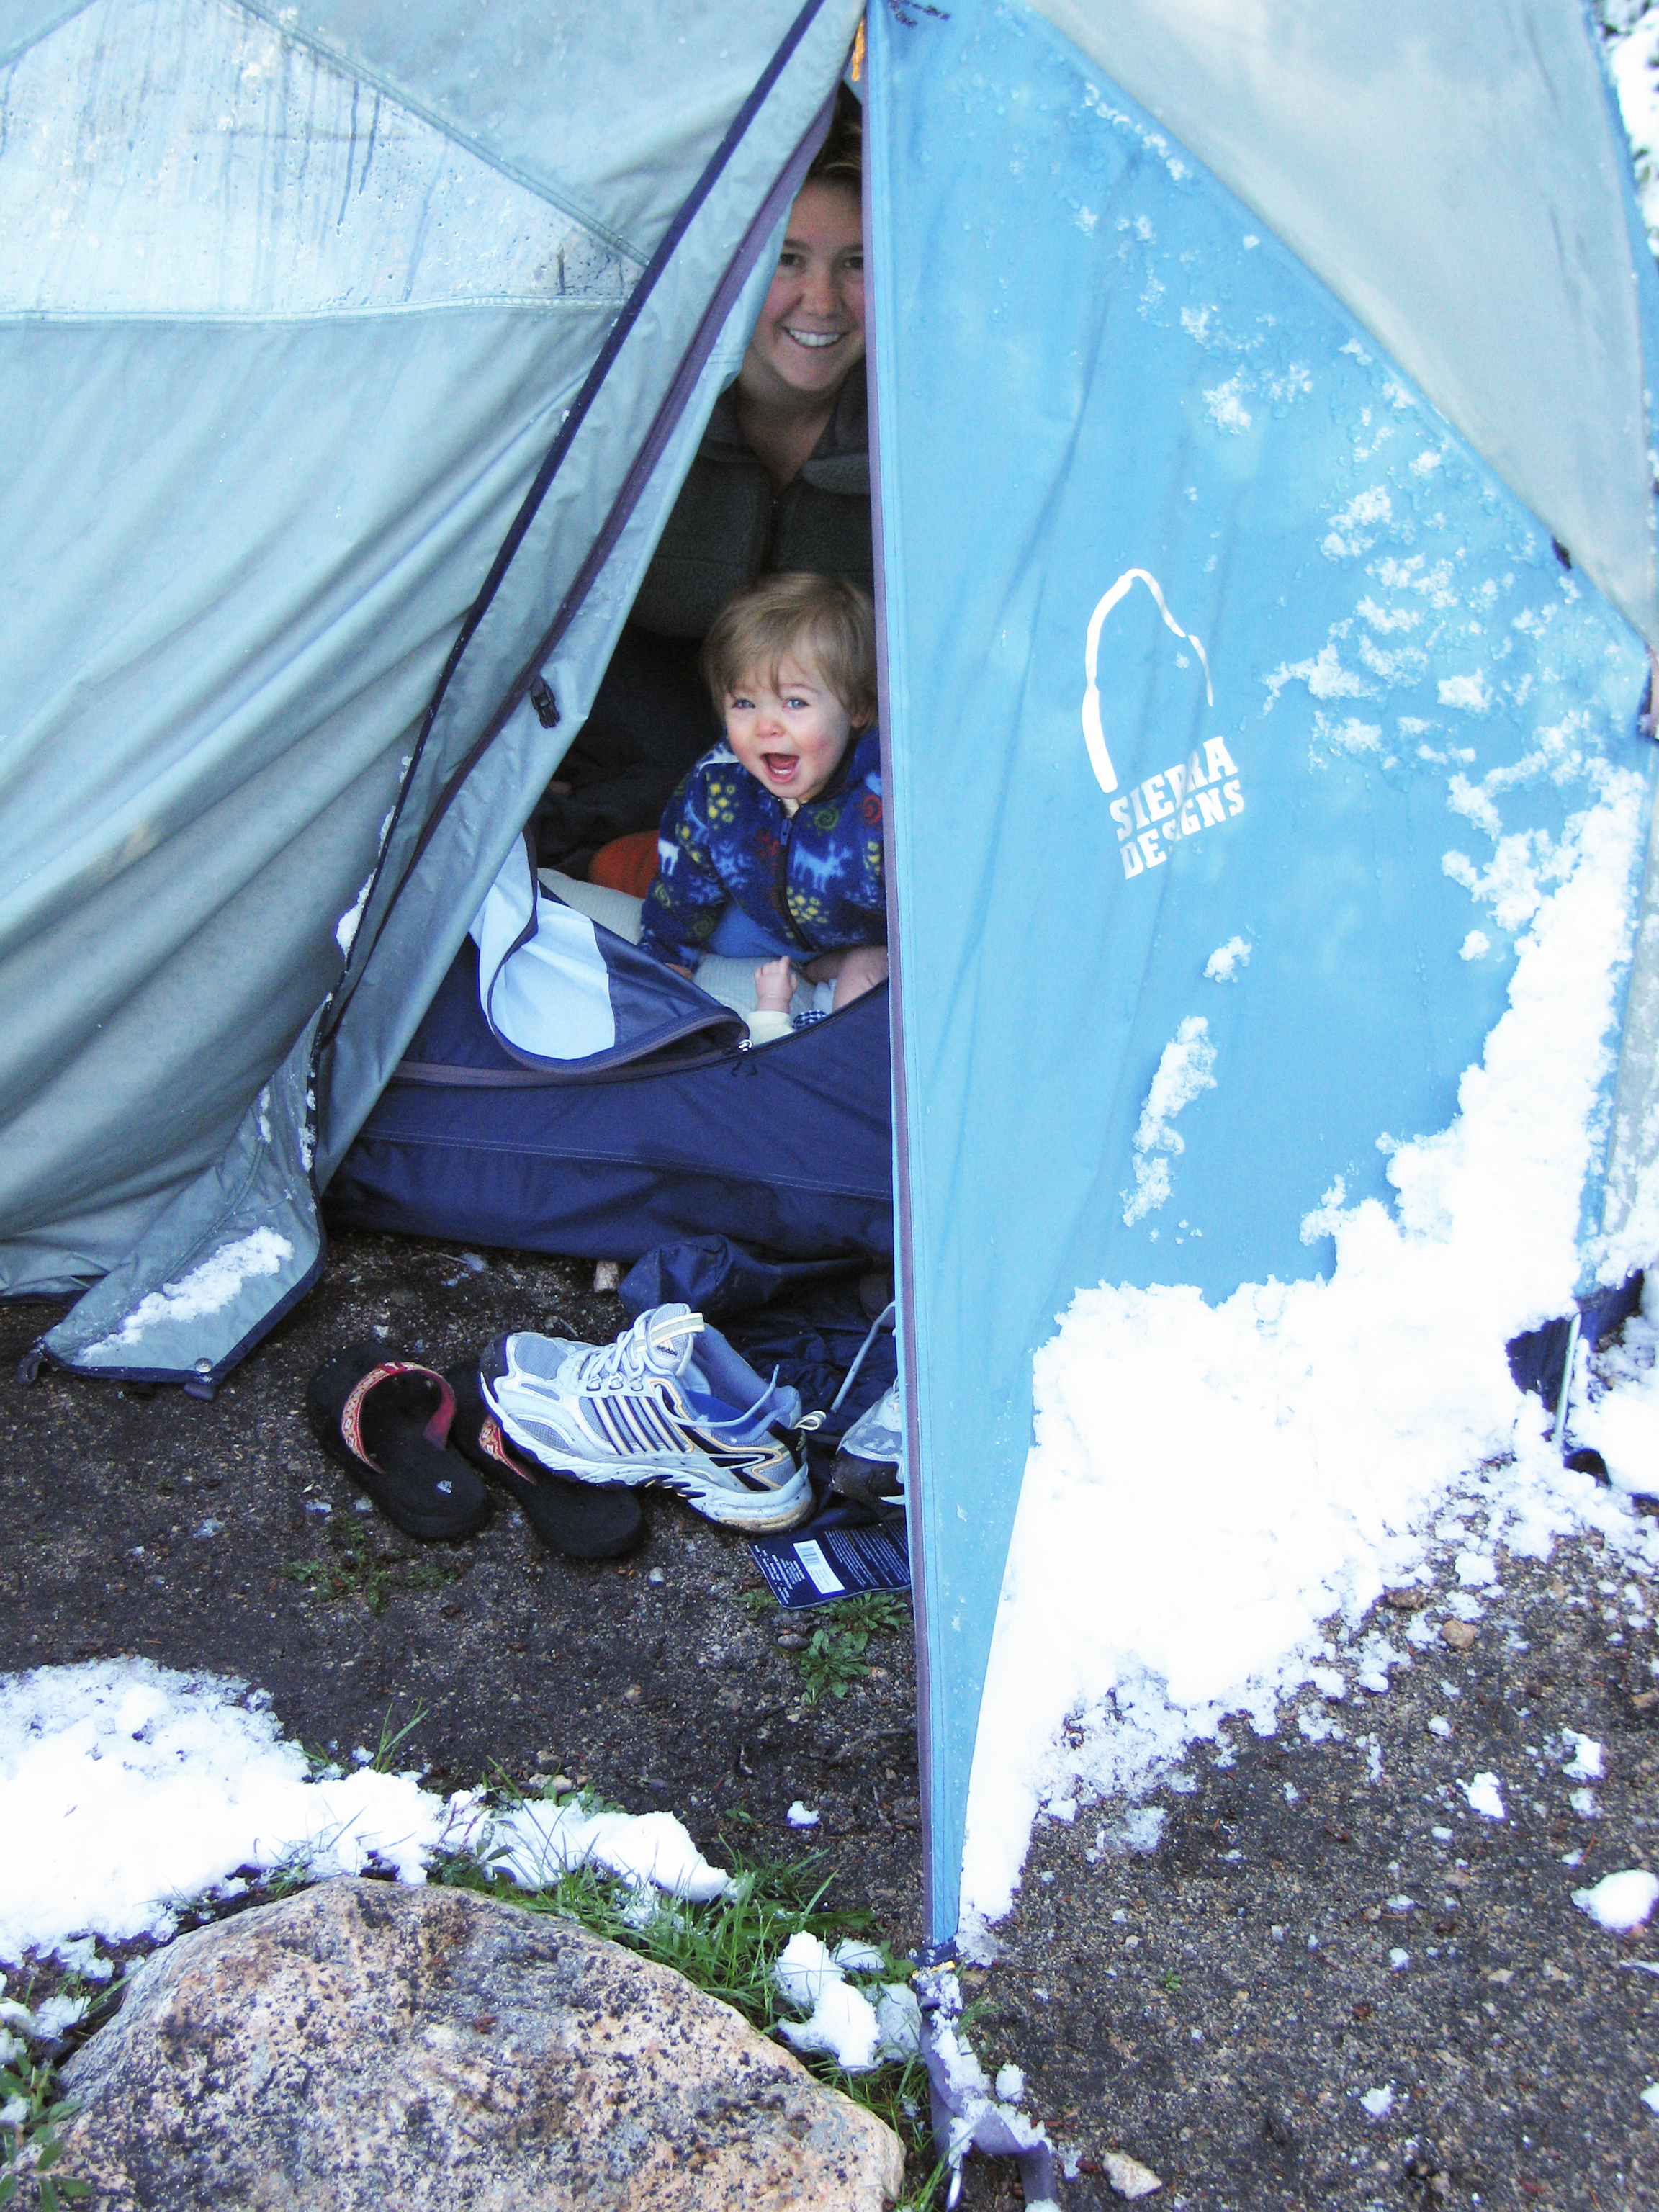 snow,kid, child,tent, camping, backcountry, adventure, family, play, outside, happy,